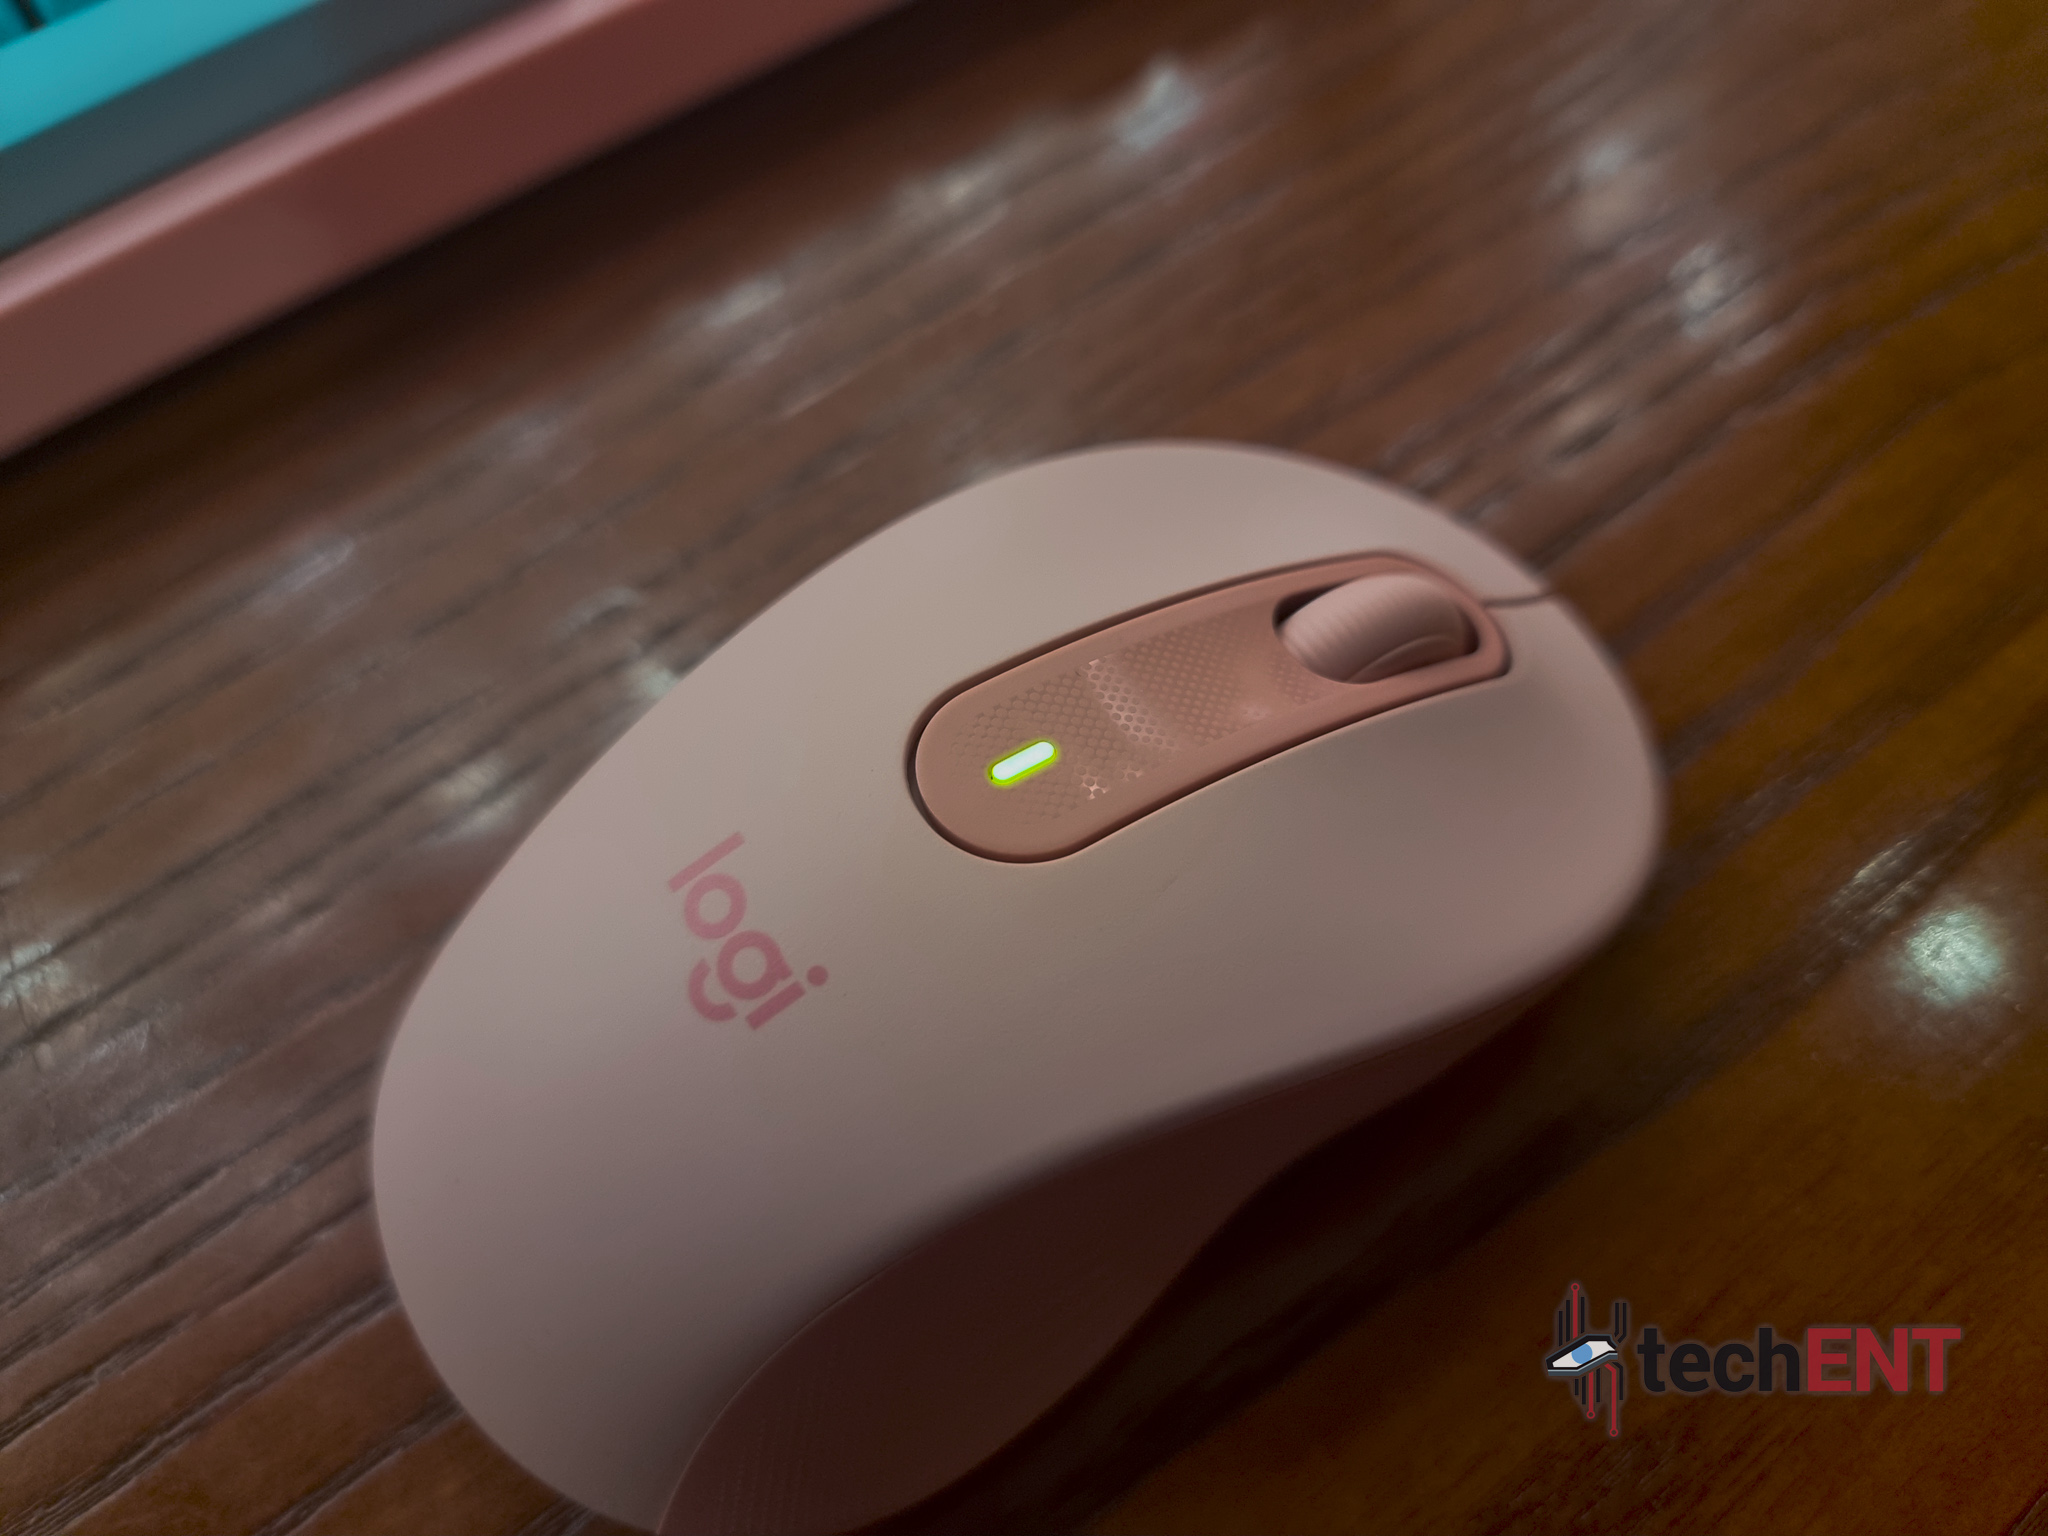 Logitech Signature M650 L Wireless Mouse Is Comfy, Smooth, Customizable,  Quiet 